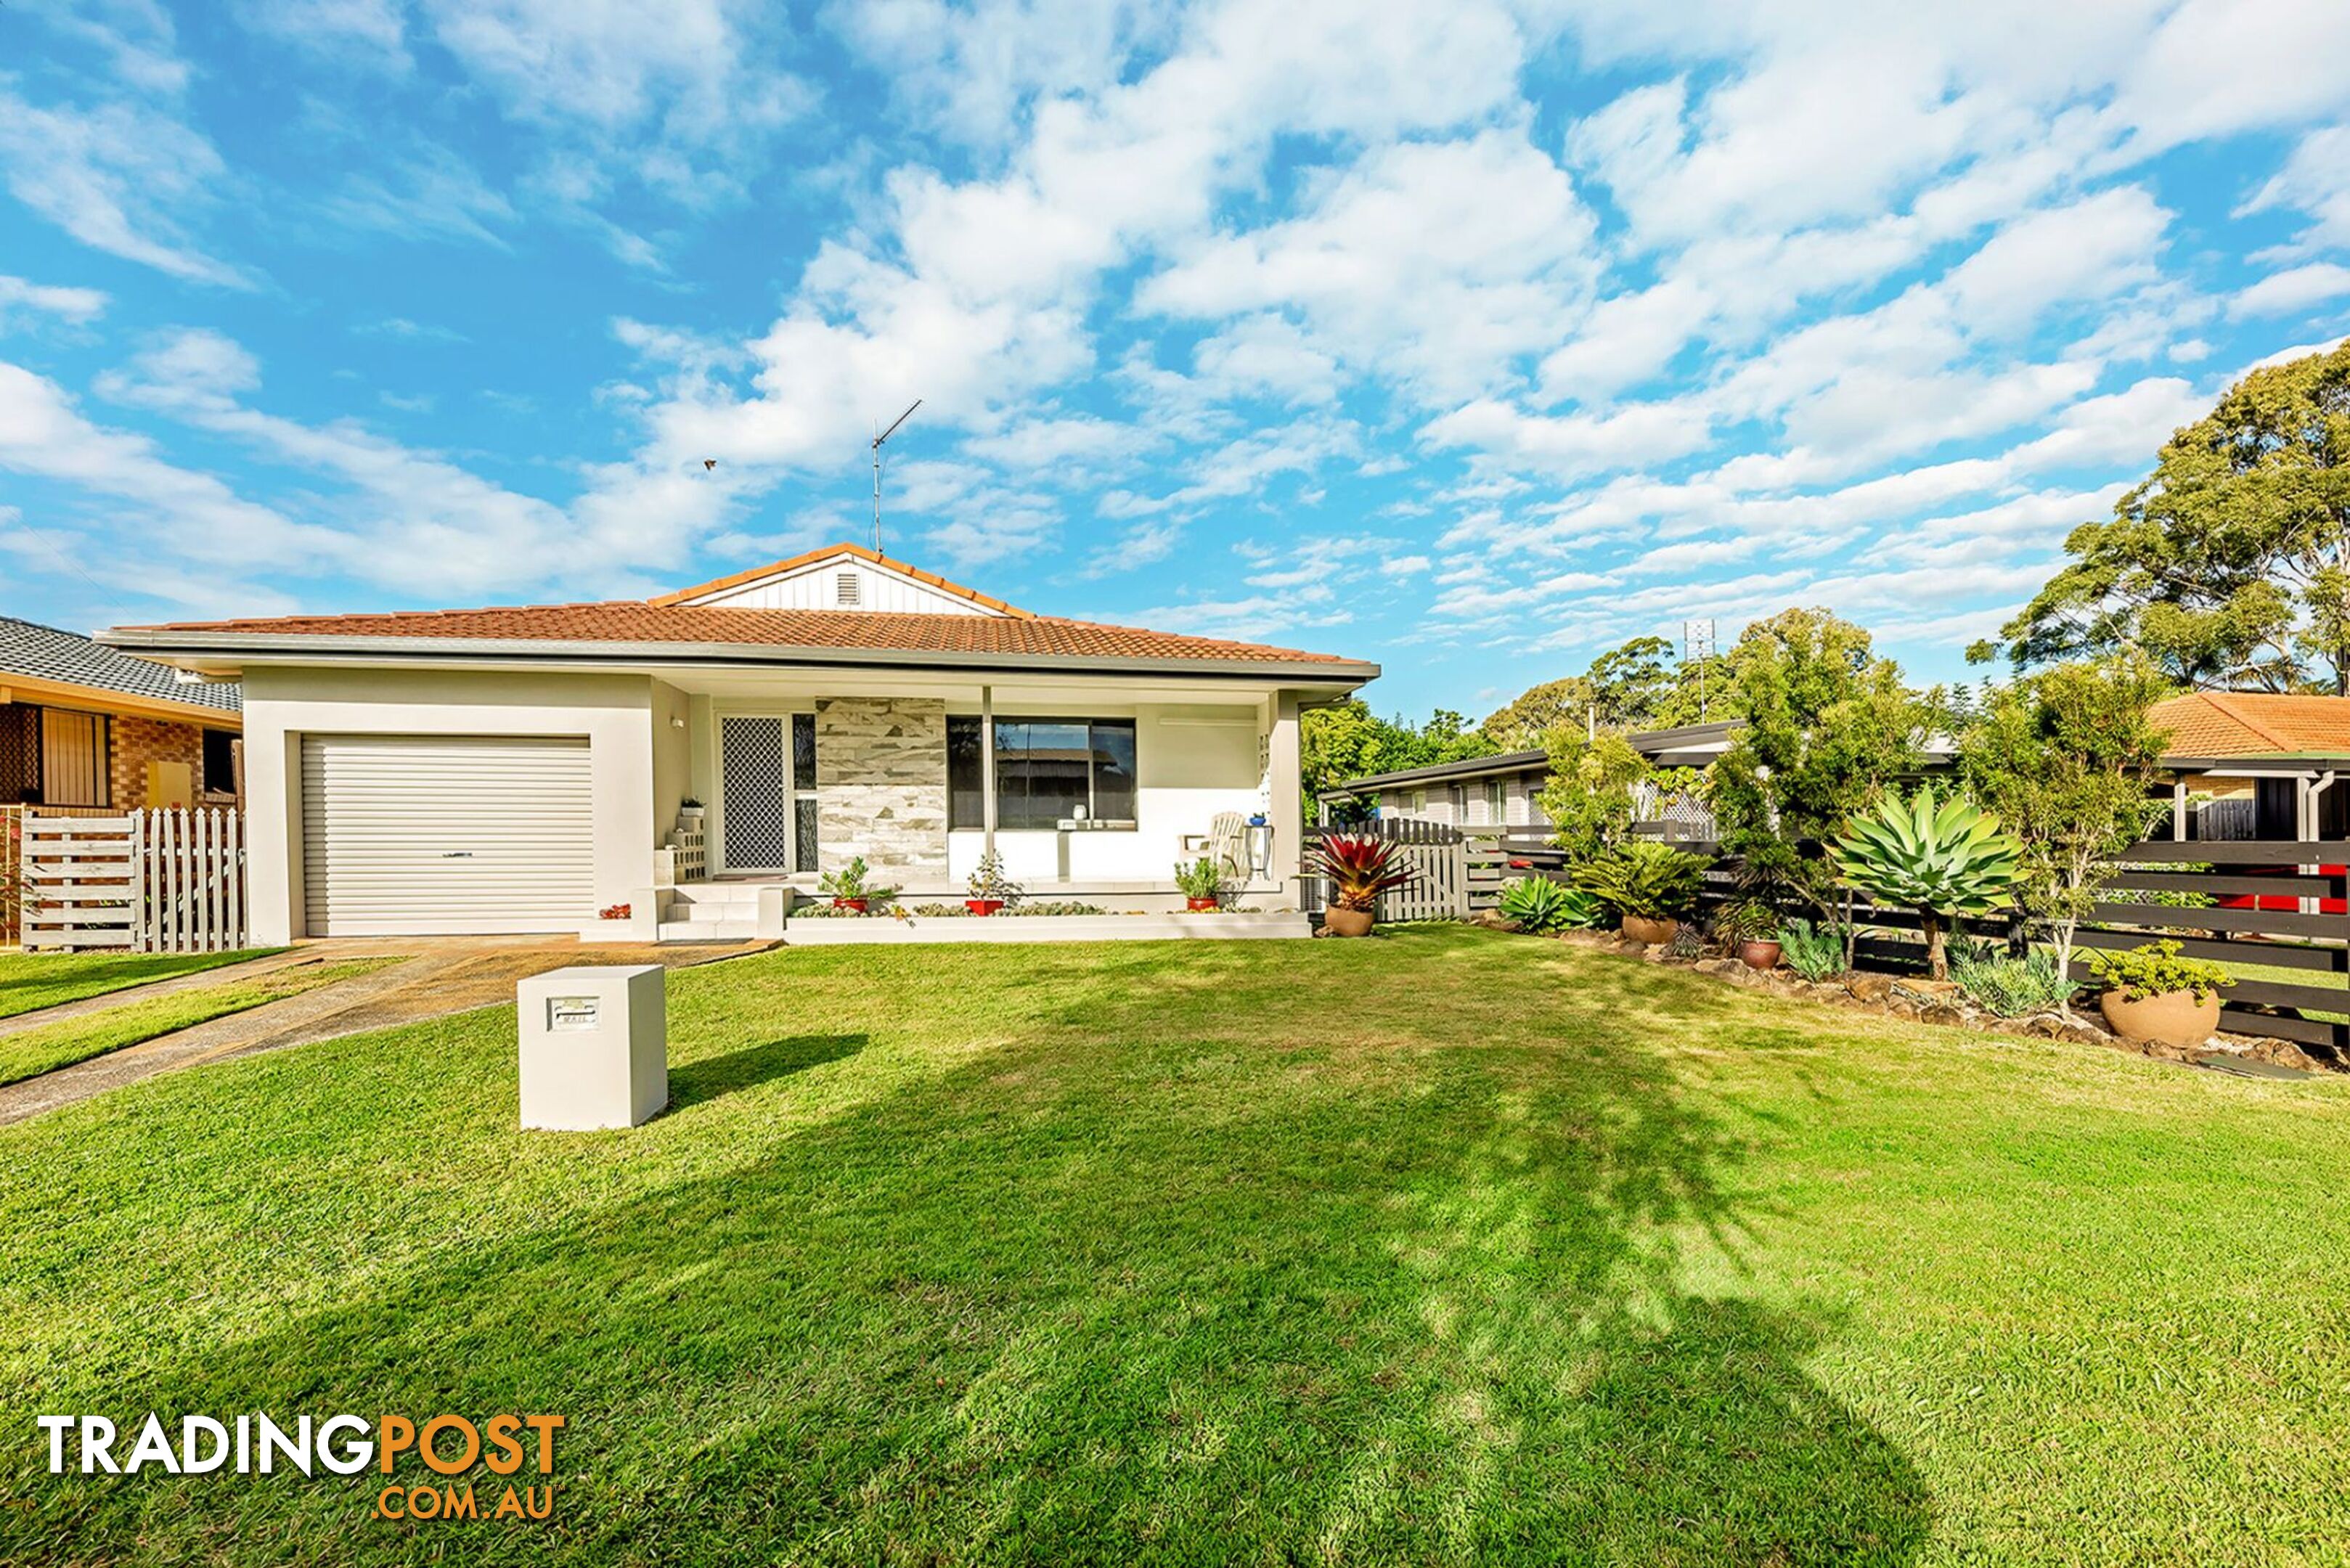 20 Holden Street Tweed Heads South NSW 2486